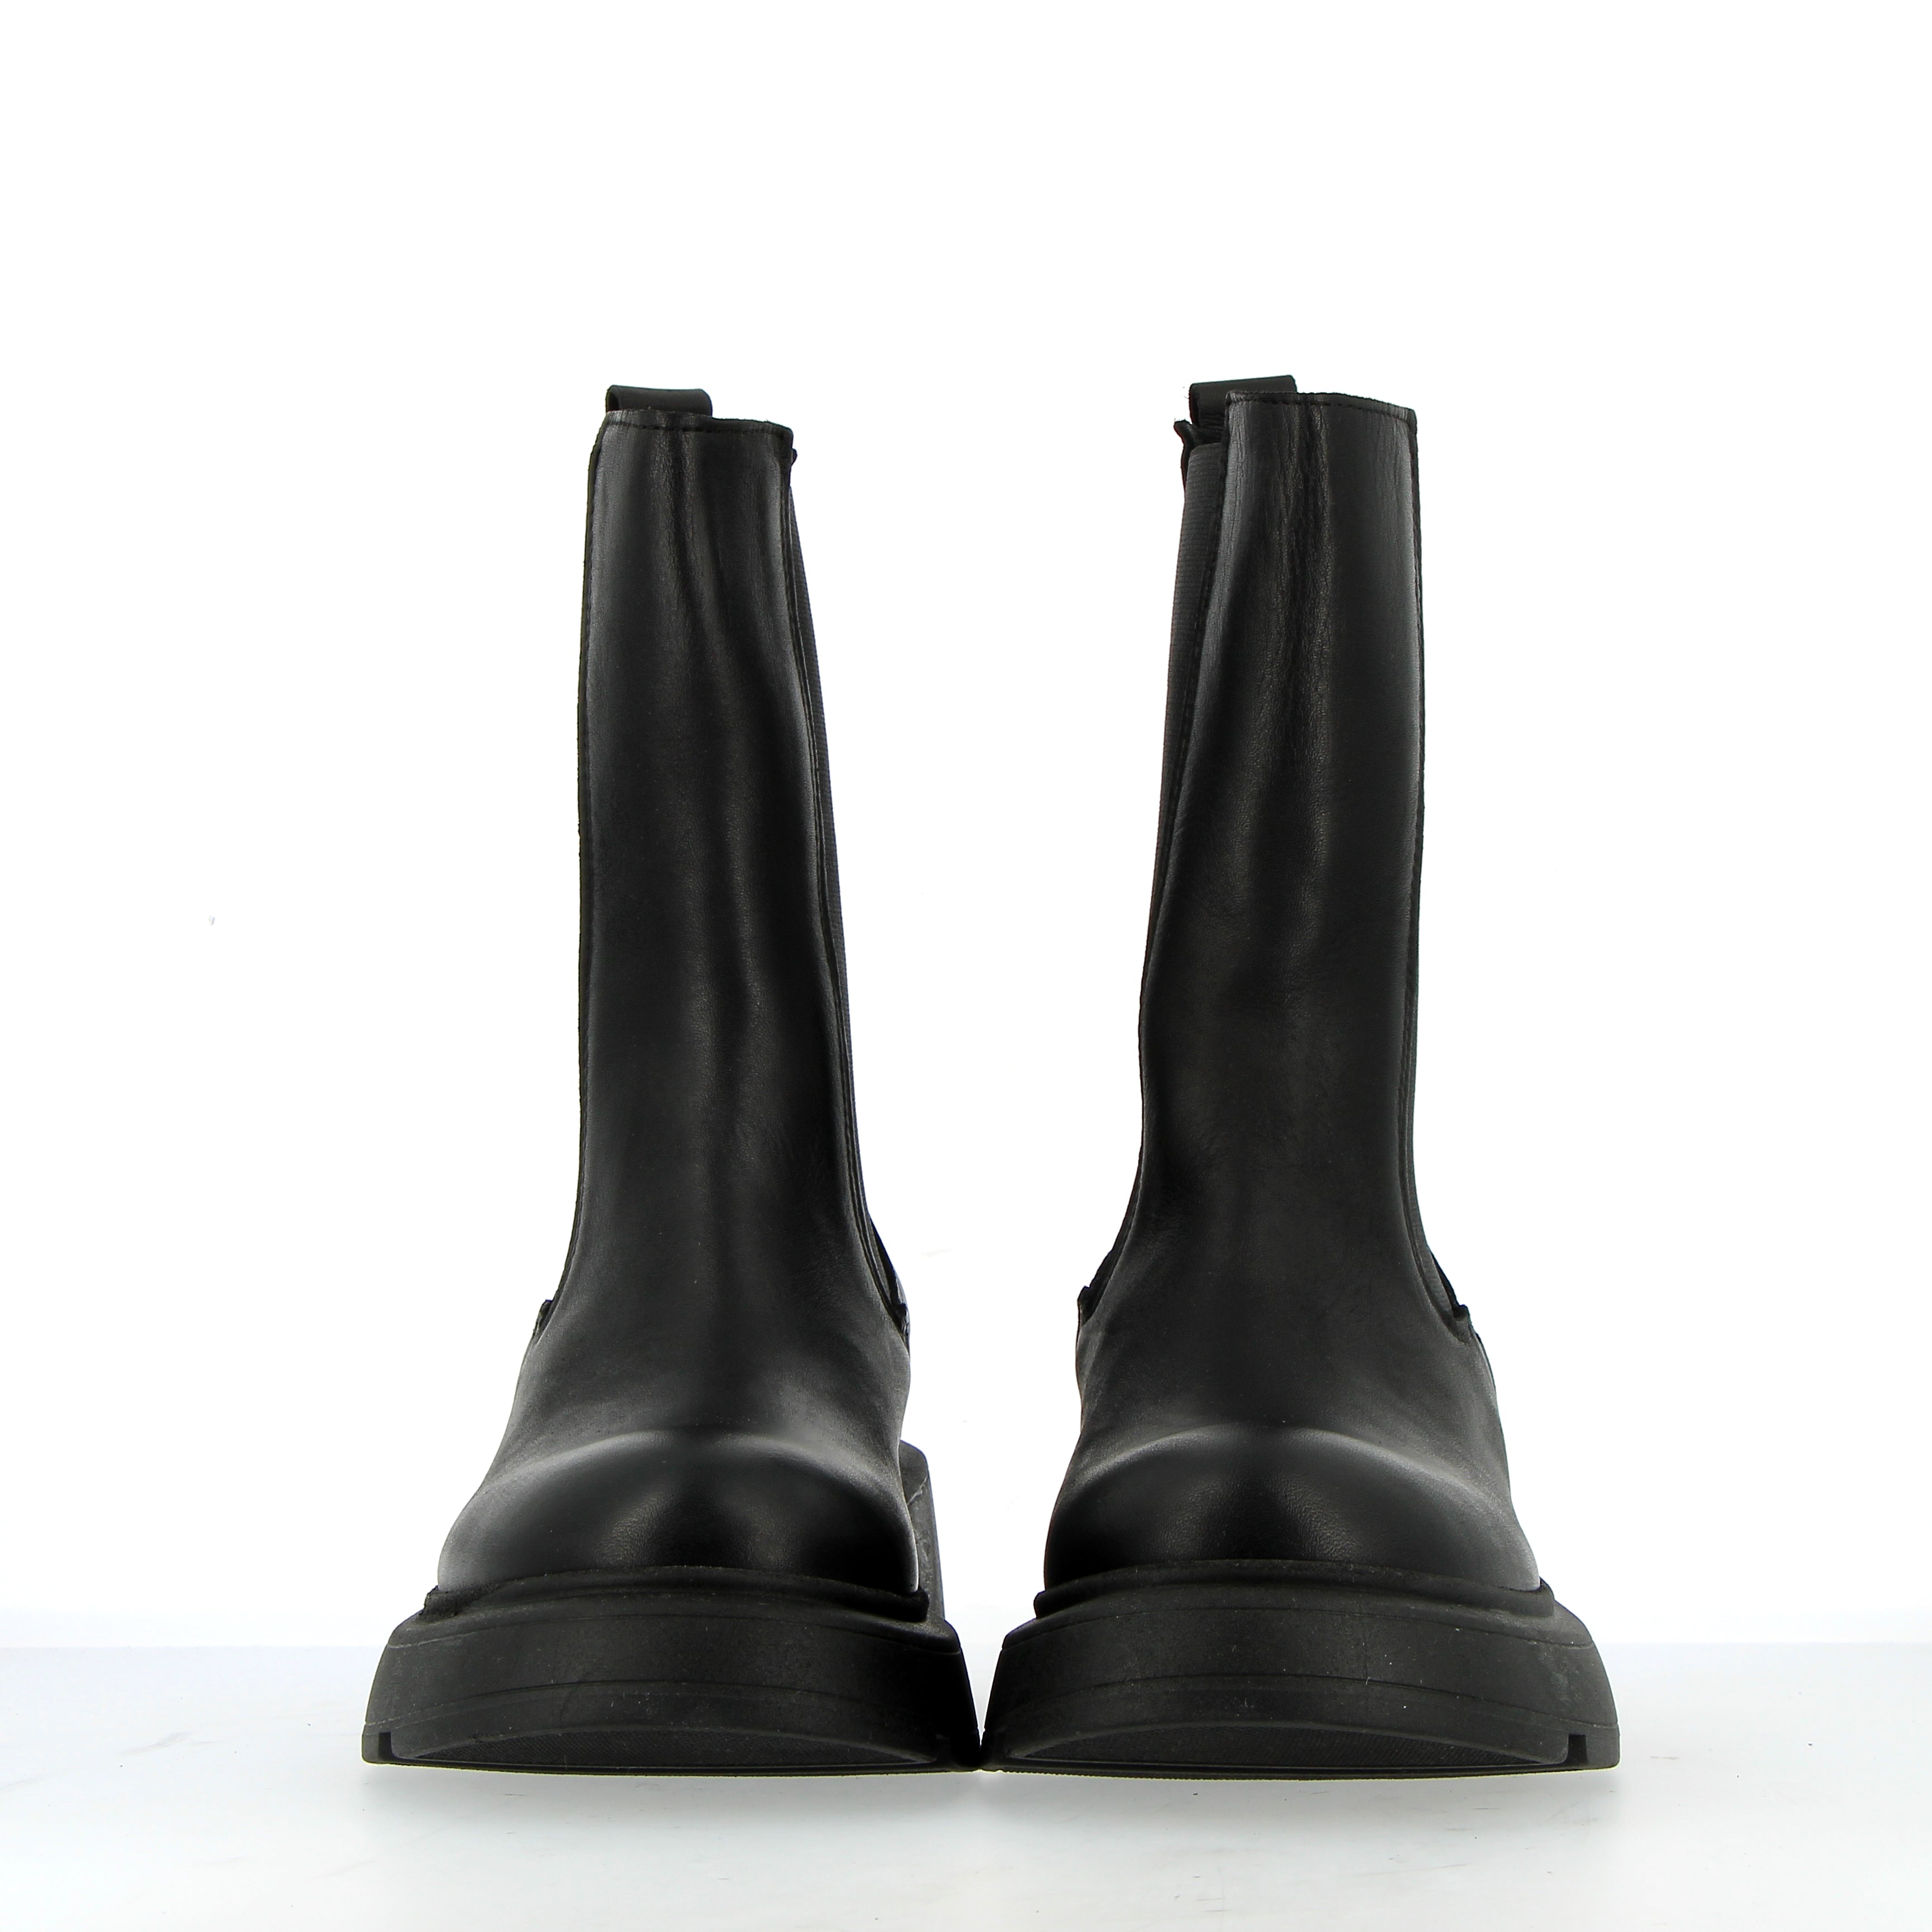 Black leather chelsea boot